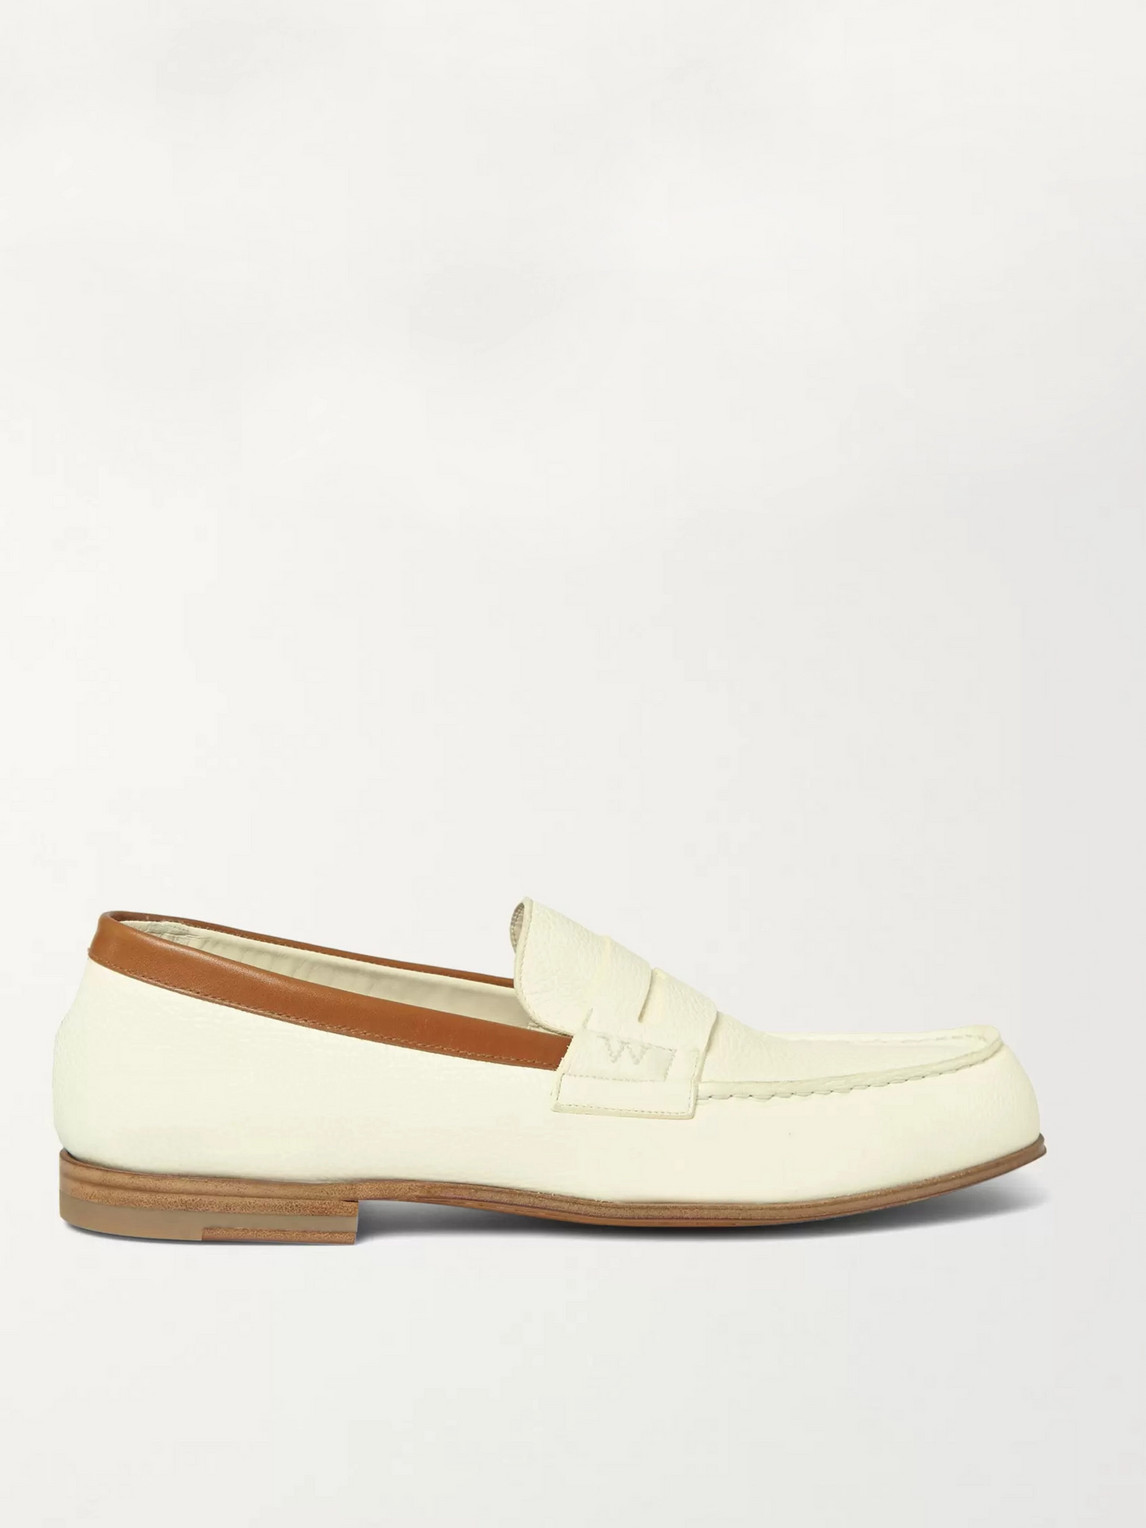 Jm Weston 281 Le Moc Textured-leather Loafers In White